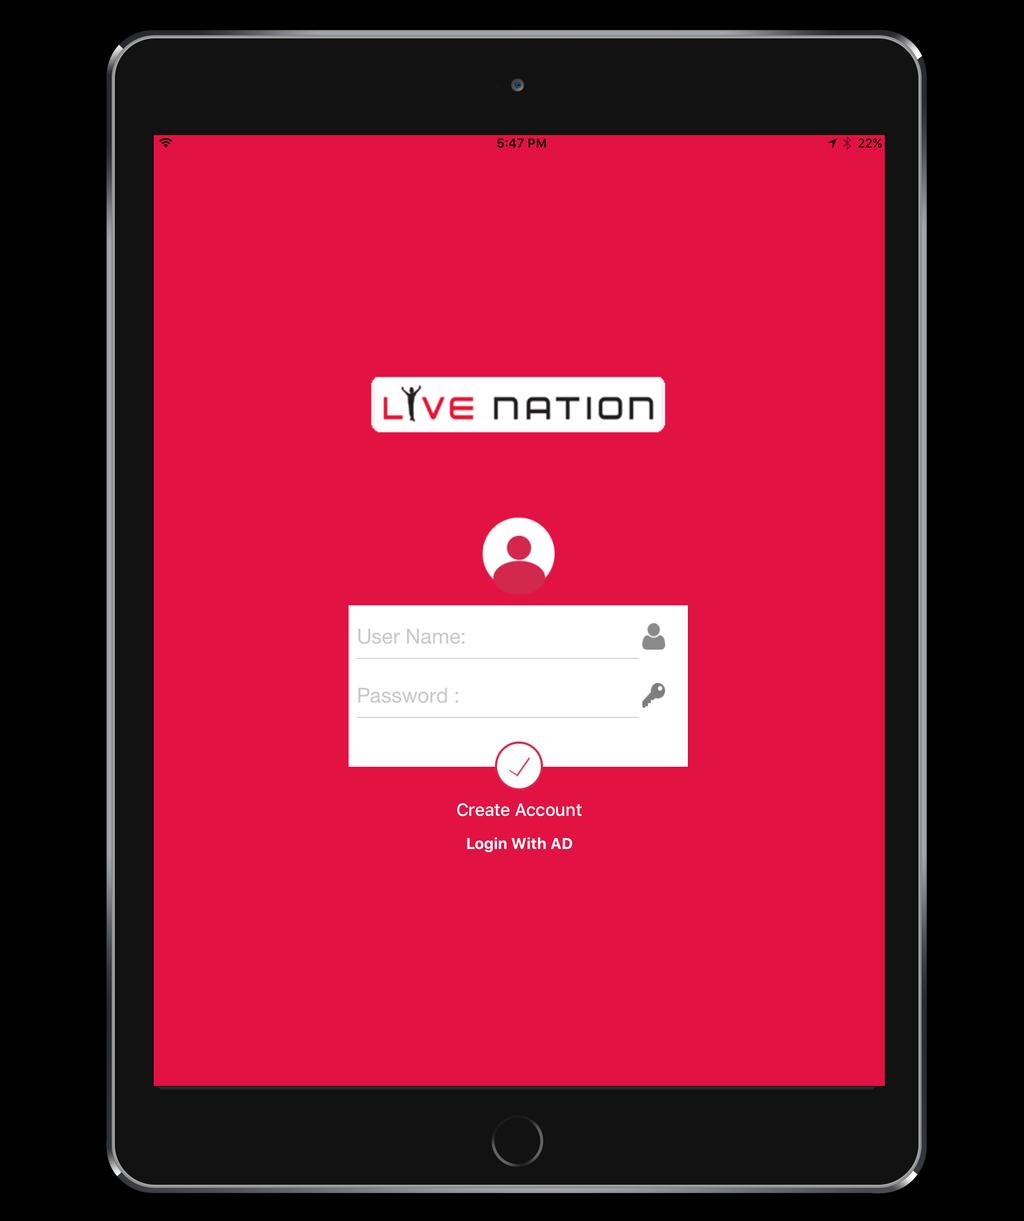 LIVENATION (CUSTOMER INCIDENT APPLICATION) One of the major companies in